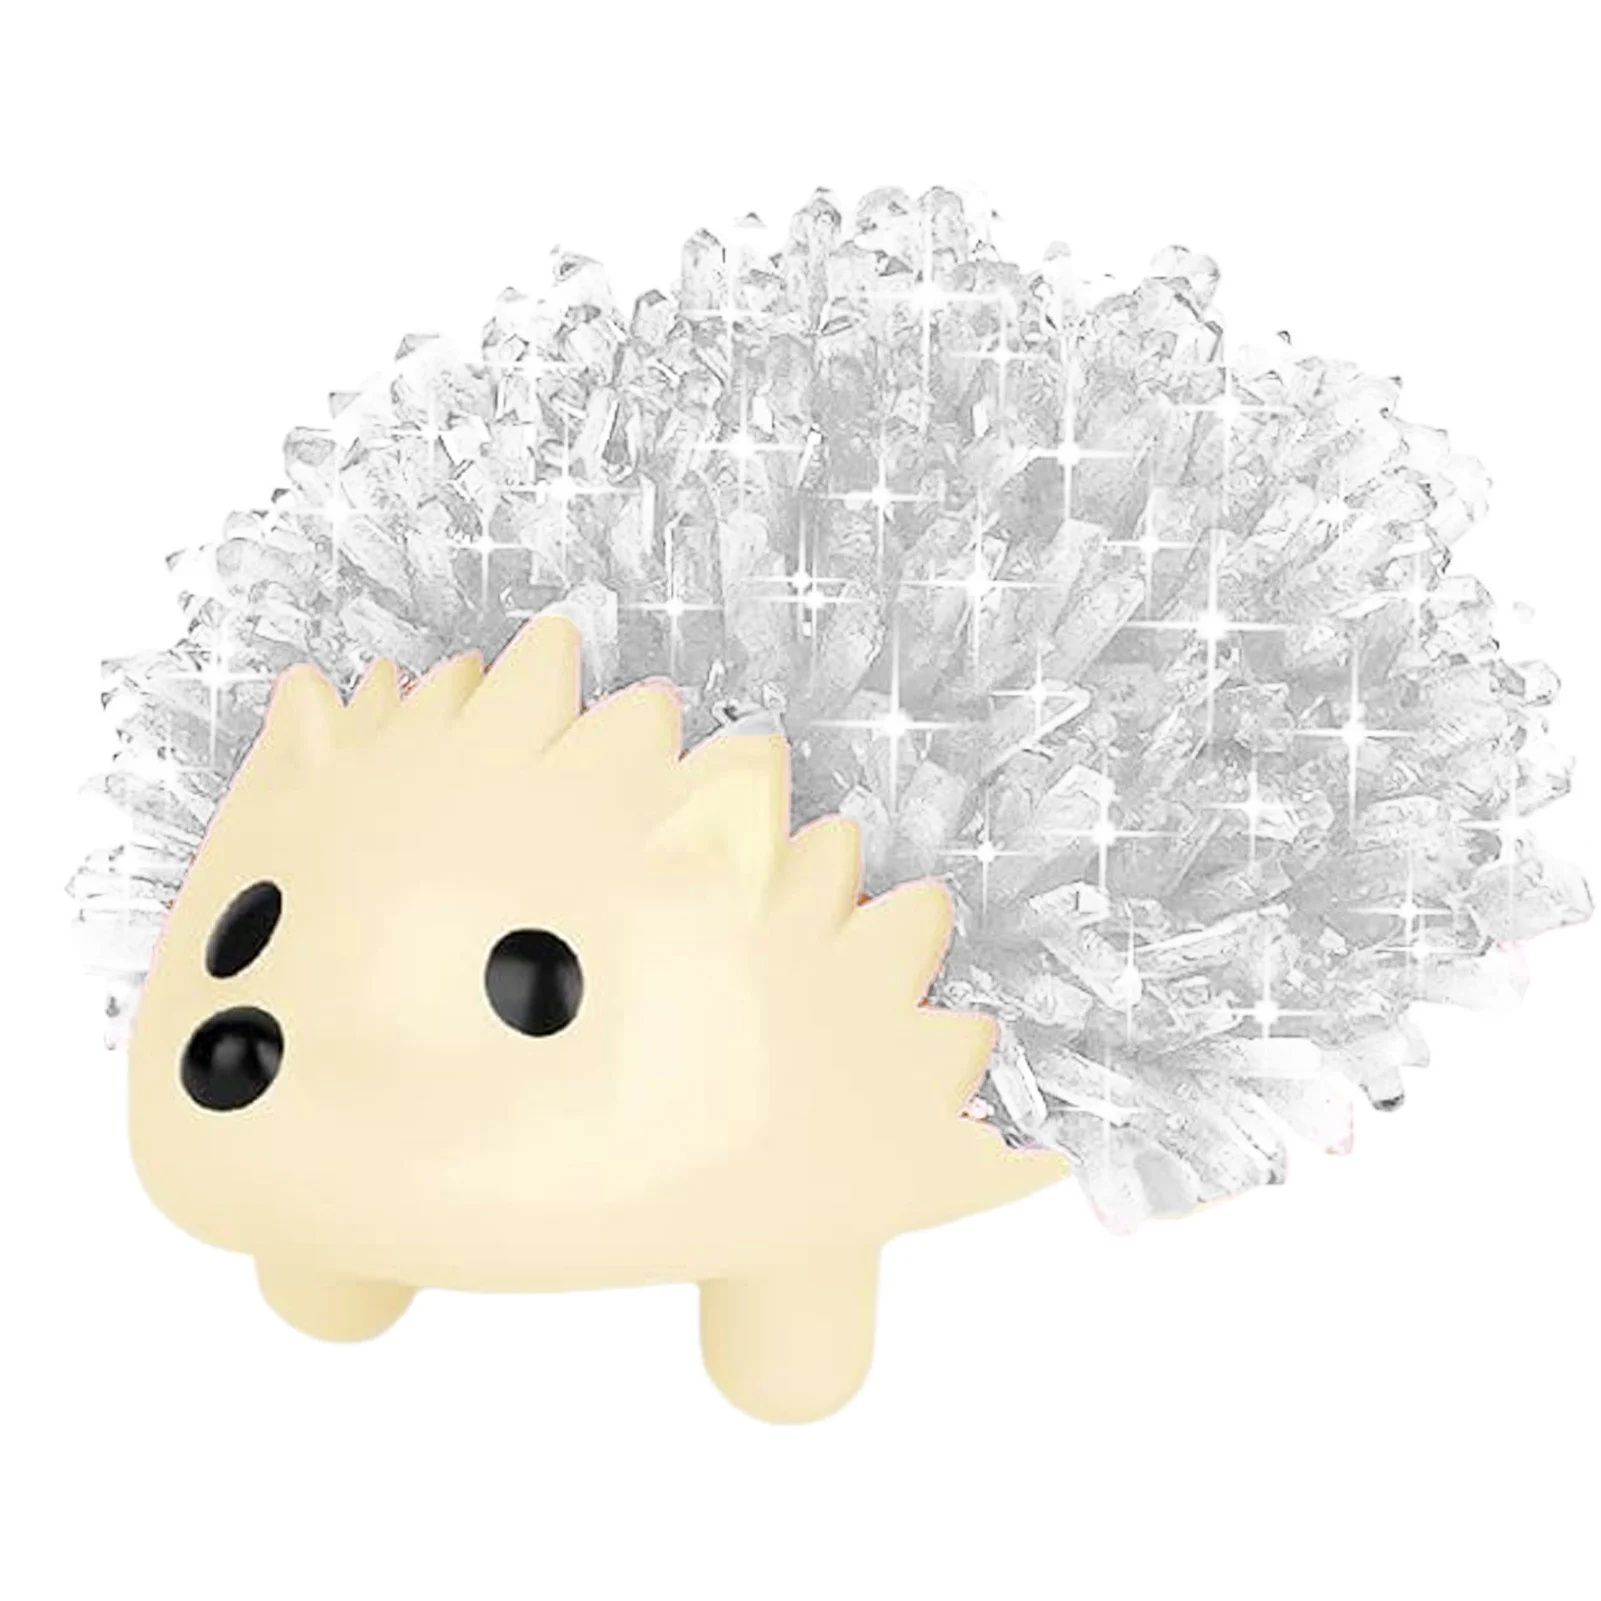 

Crystal Growing Hedgehog Kit Convenient to Use Safe Material Science Experiments Educational Gift For All Ages